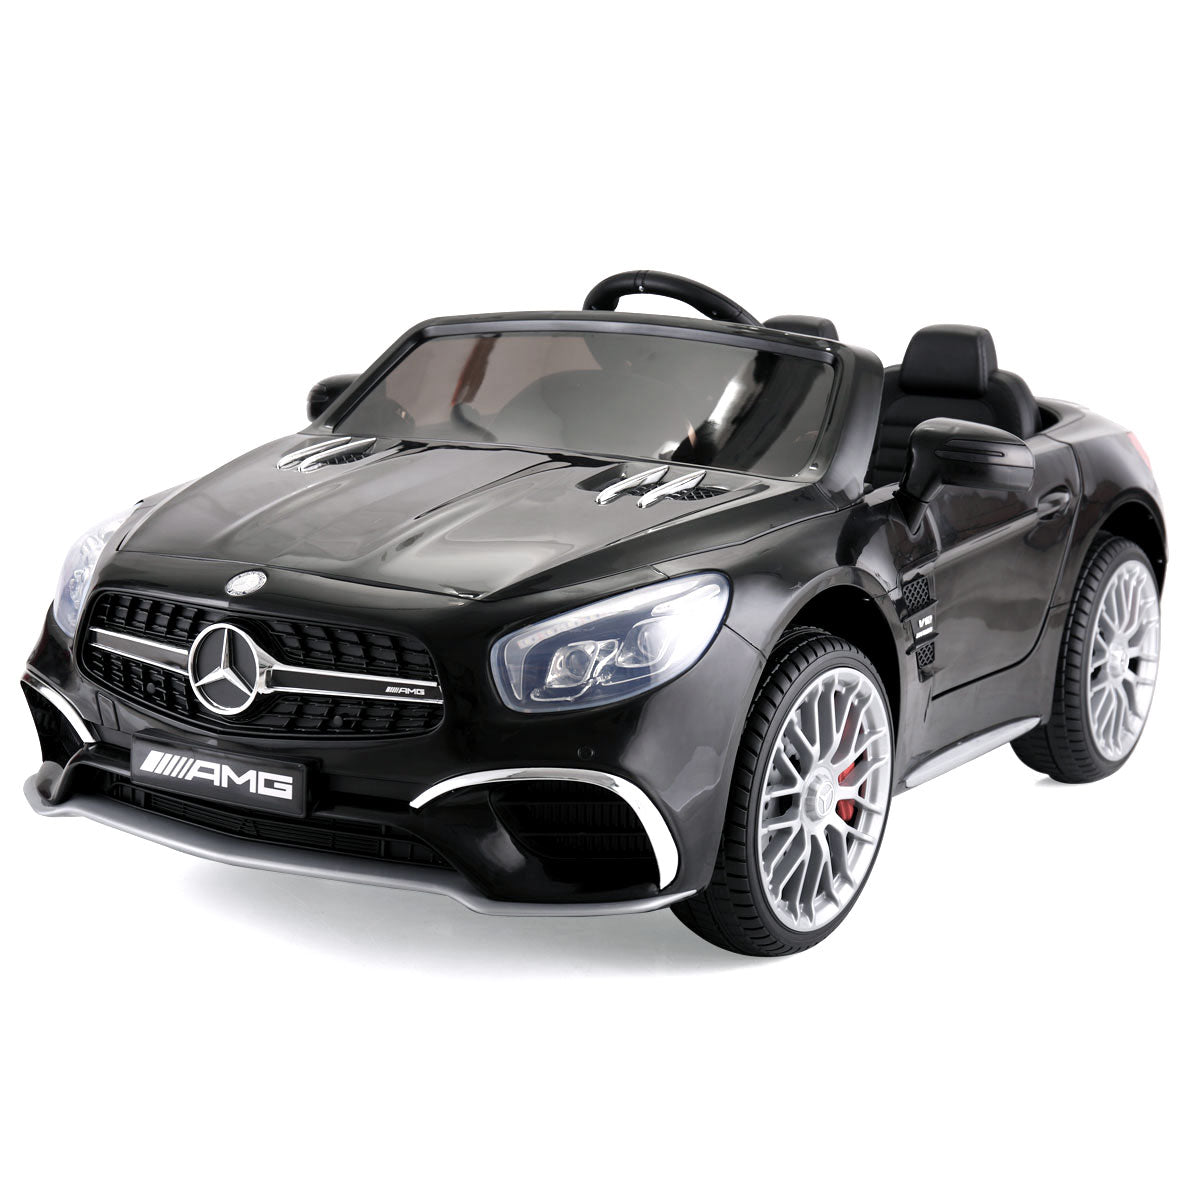 2 Seater Kids Ride On Car, Mercedes Benz Licensed Electric Car for Kids, Power Vehicle with Remote Control, 3 Speeds, LED Lights, MP3 Player, USB Port, Gift for Age 1-5 Years, K1402